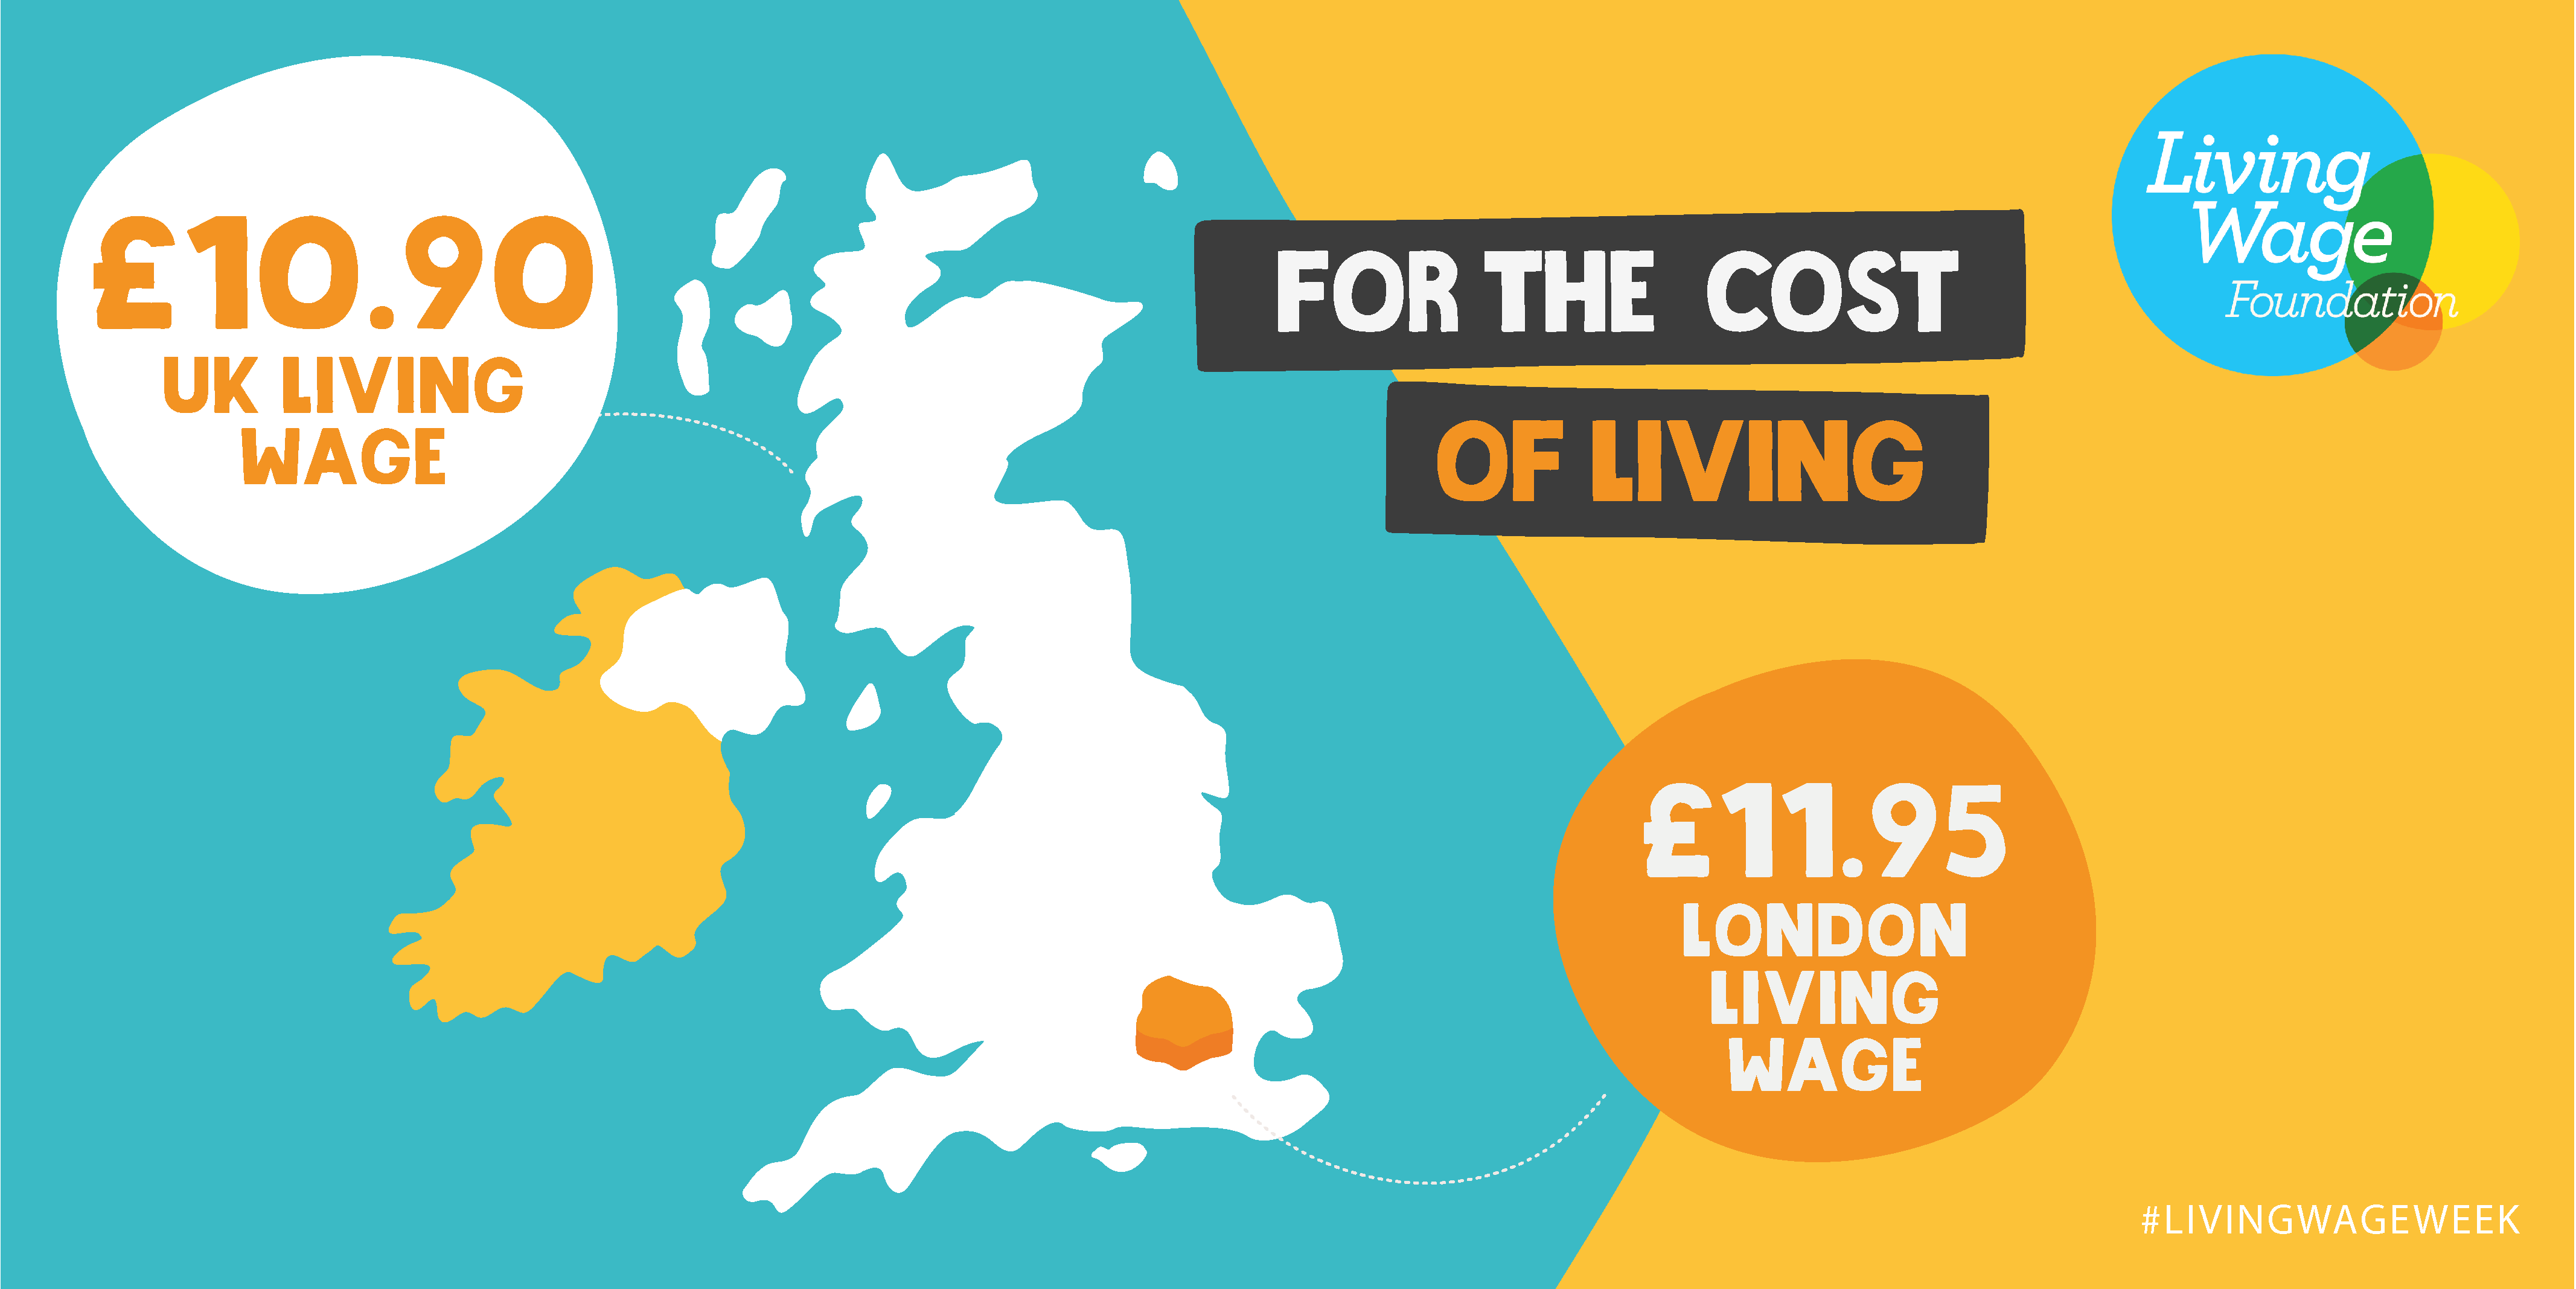 The real Living Wage increases to £10.90 in Scotland as the cost of